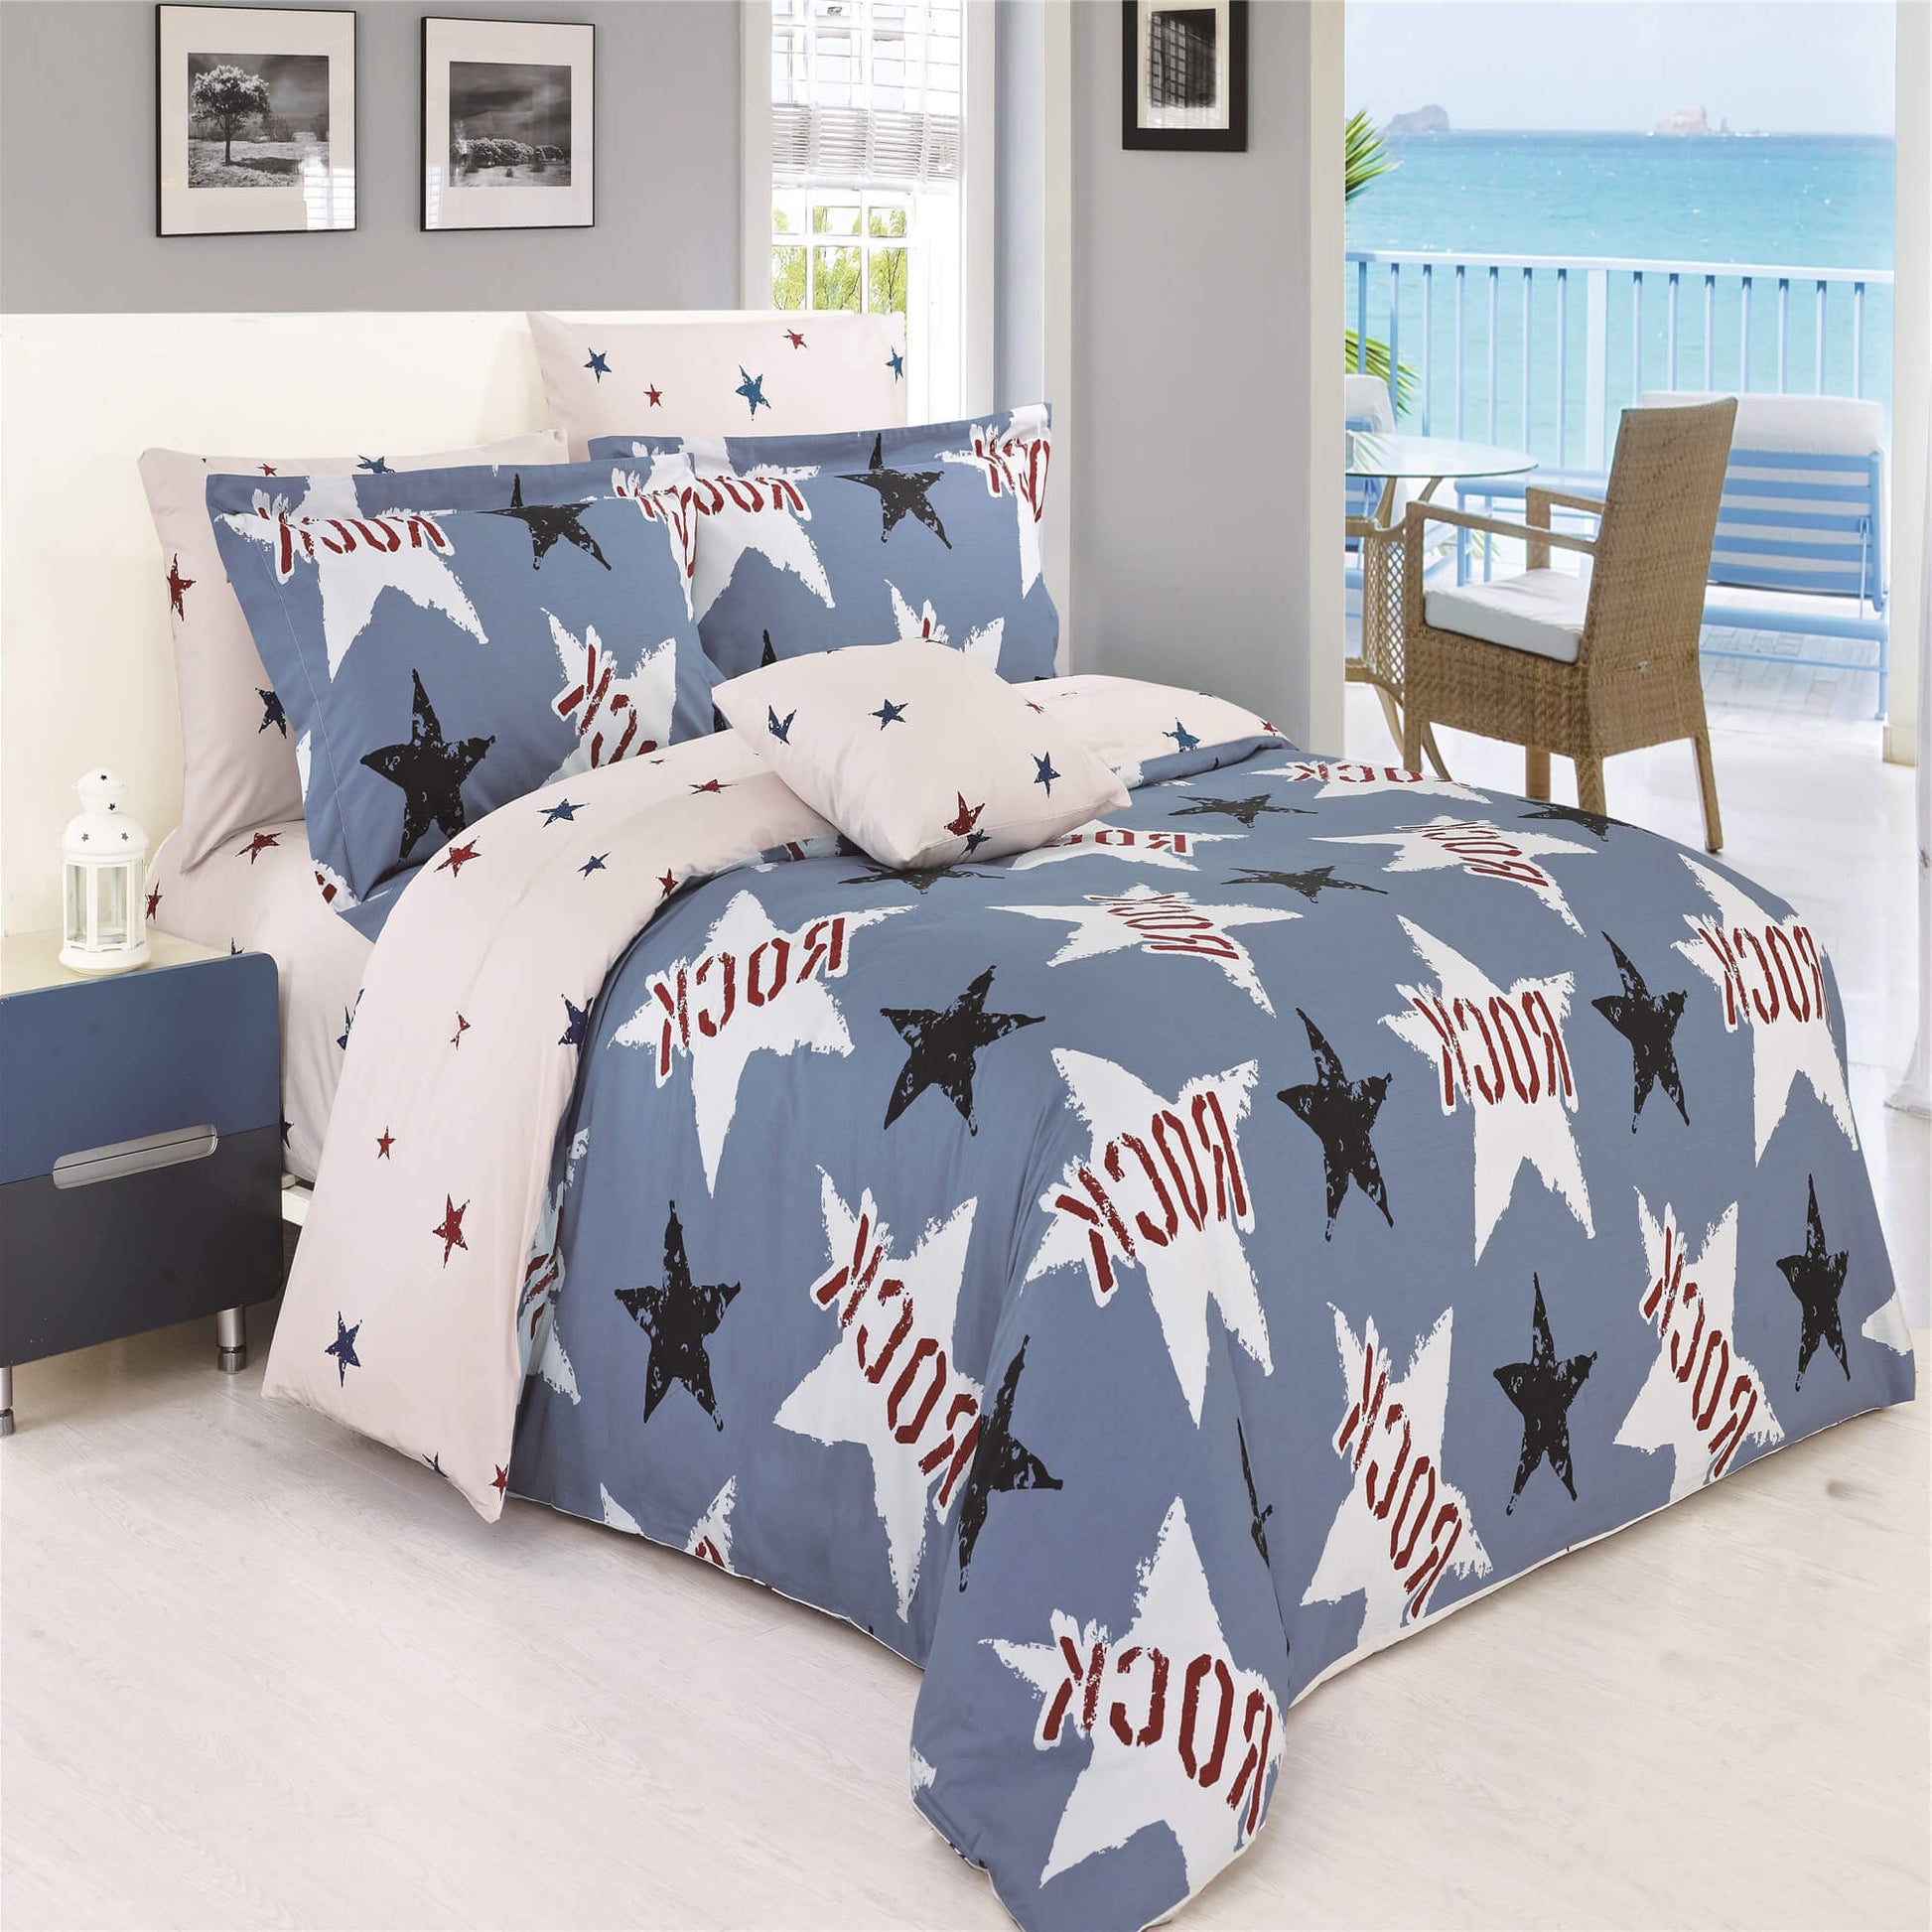 Rock Duvet Cover Set freeshipping - North Home